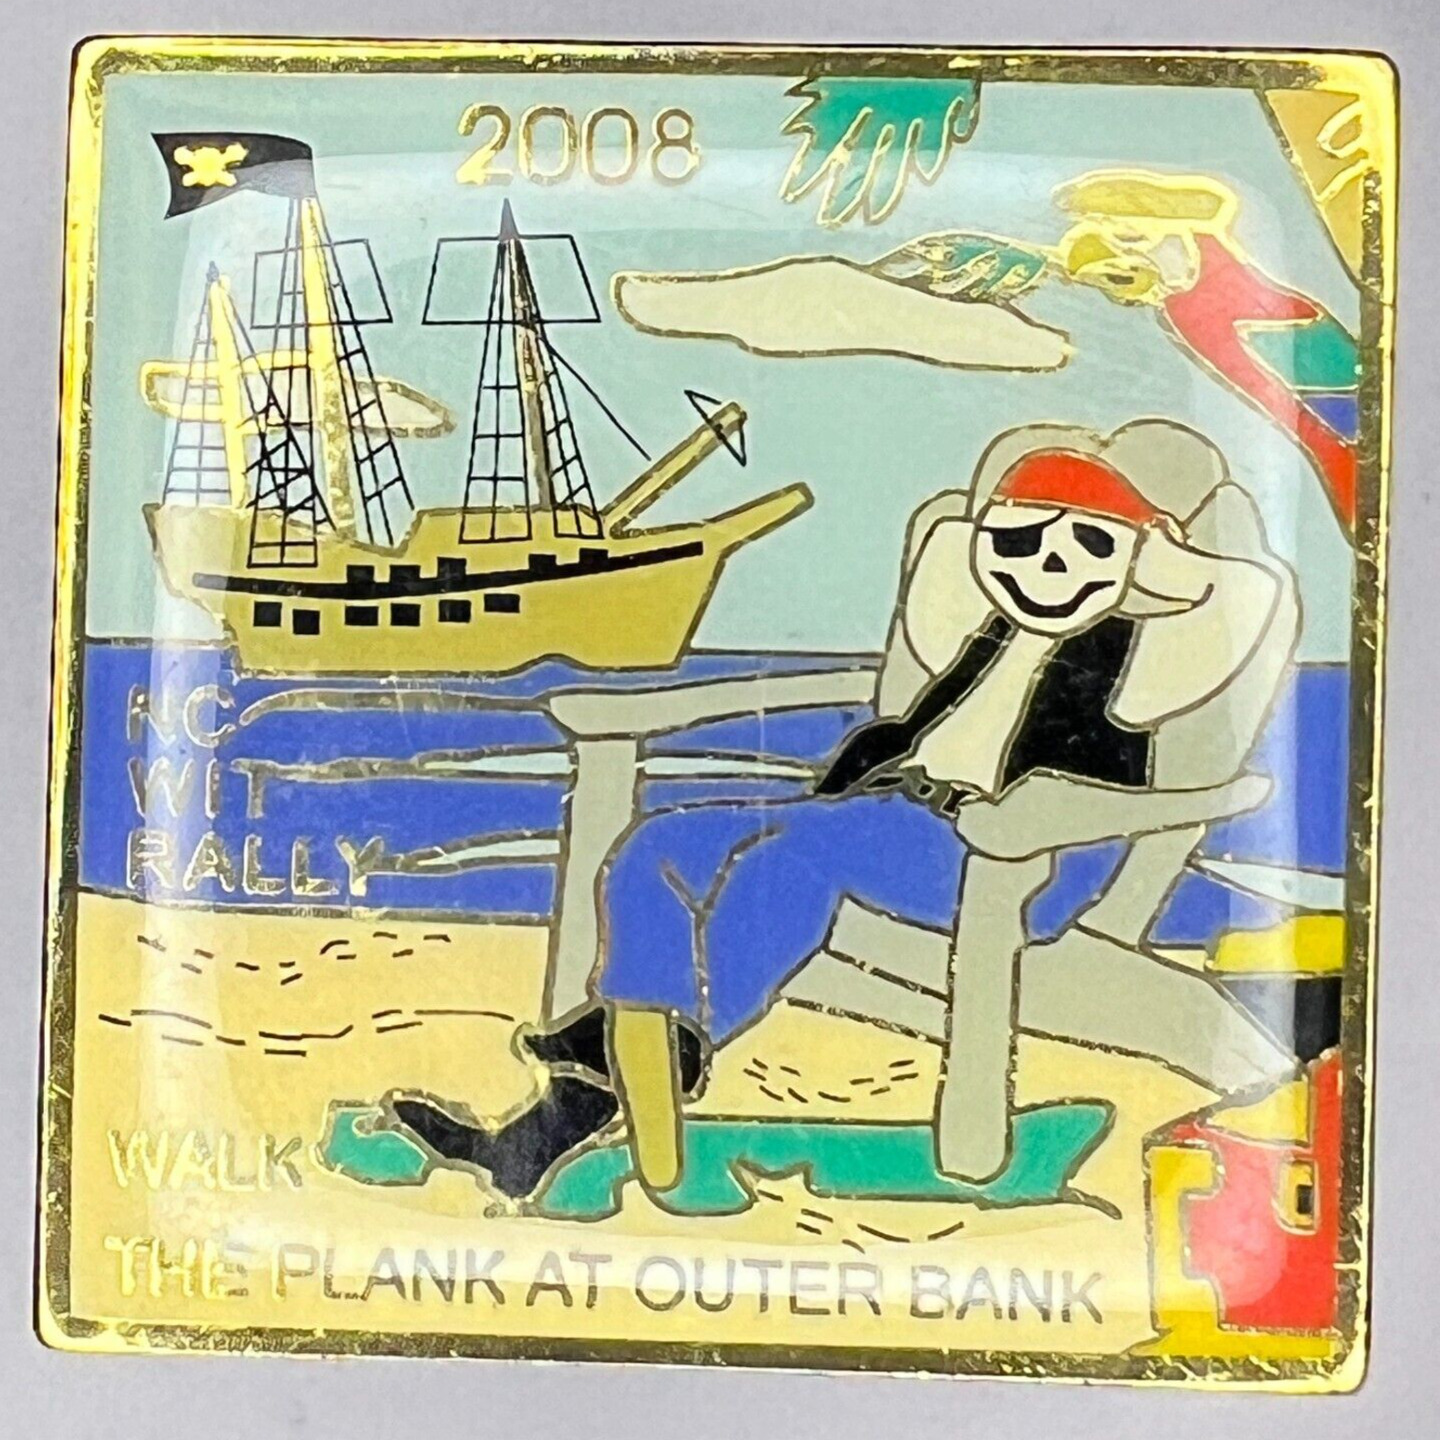 Lapel Pin NC WIT Rally Winnebago 2008 Walk The Plank At Outer Bank RV Travel Pin